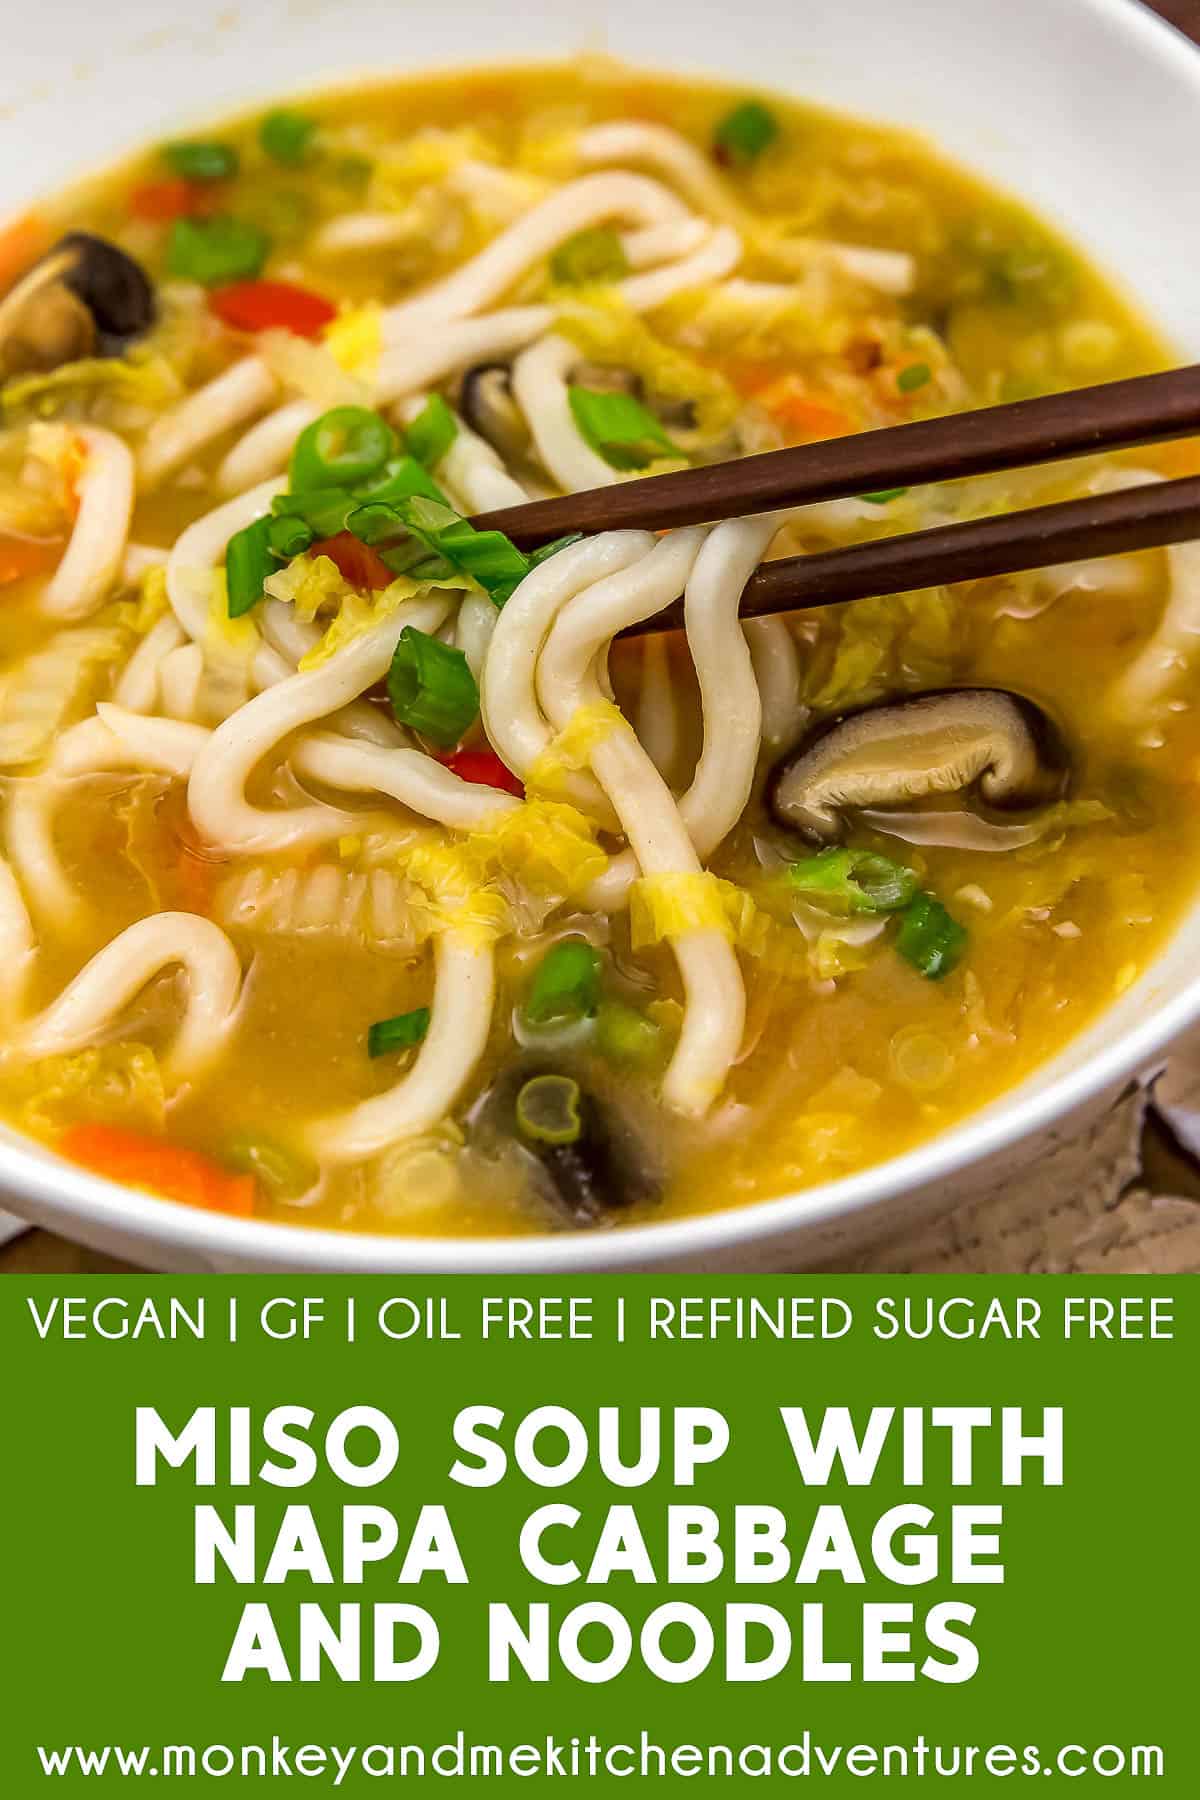 Miso-Soup-with-Napa-Cabbage-and-Noodles.jpg